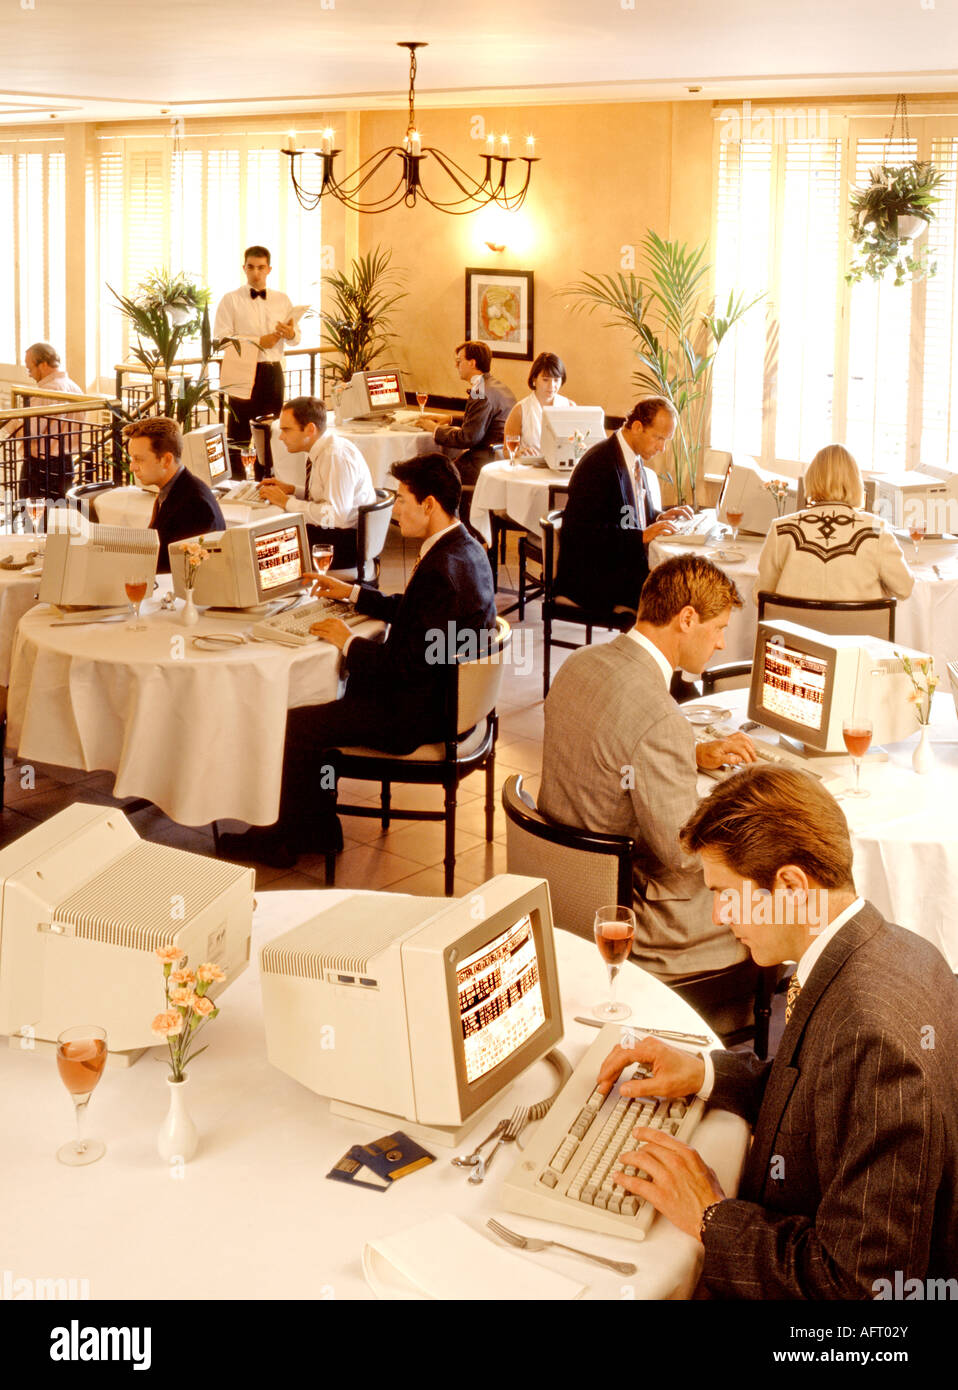 A WORKING LUNCH, OFFICE WORKERS HAVING A COMPUTER FOR LUNCH IN A RESTAURANT LUNCH BREAK Stock Photo